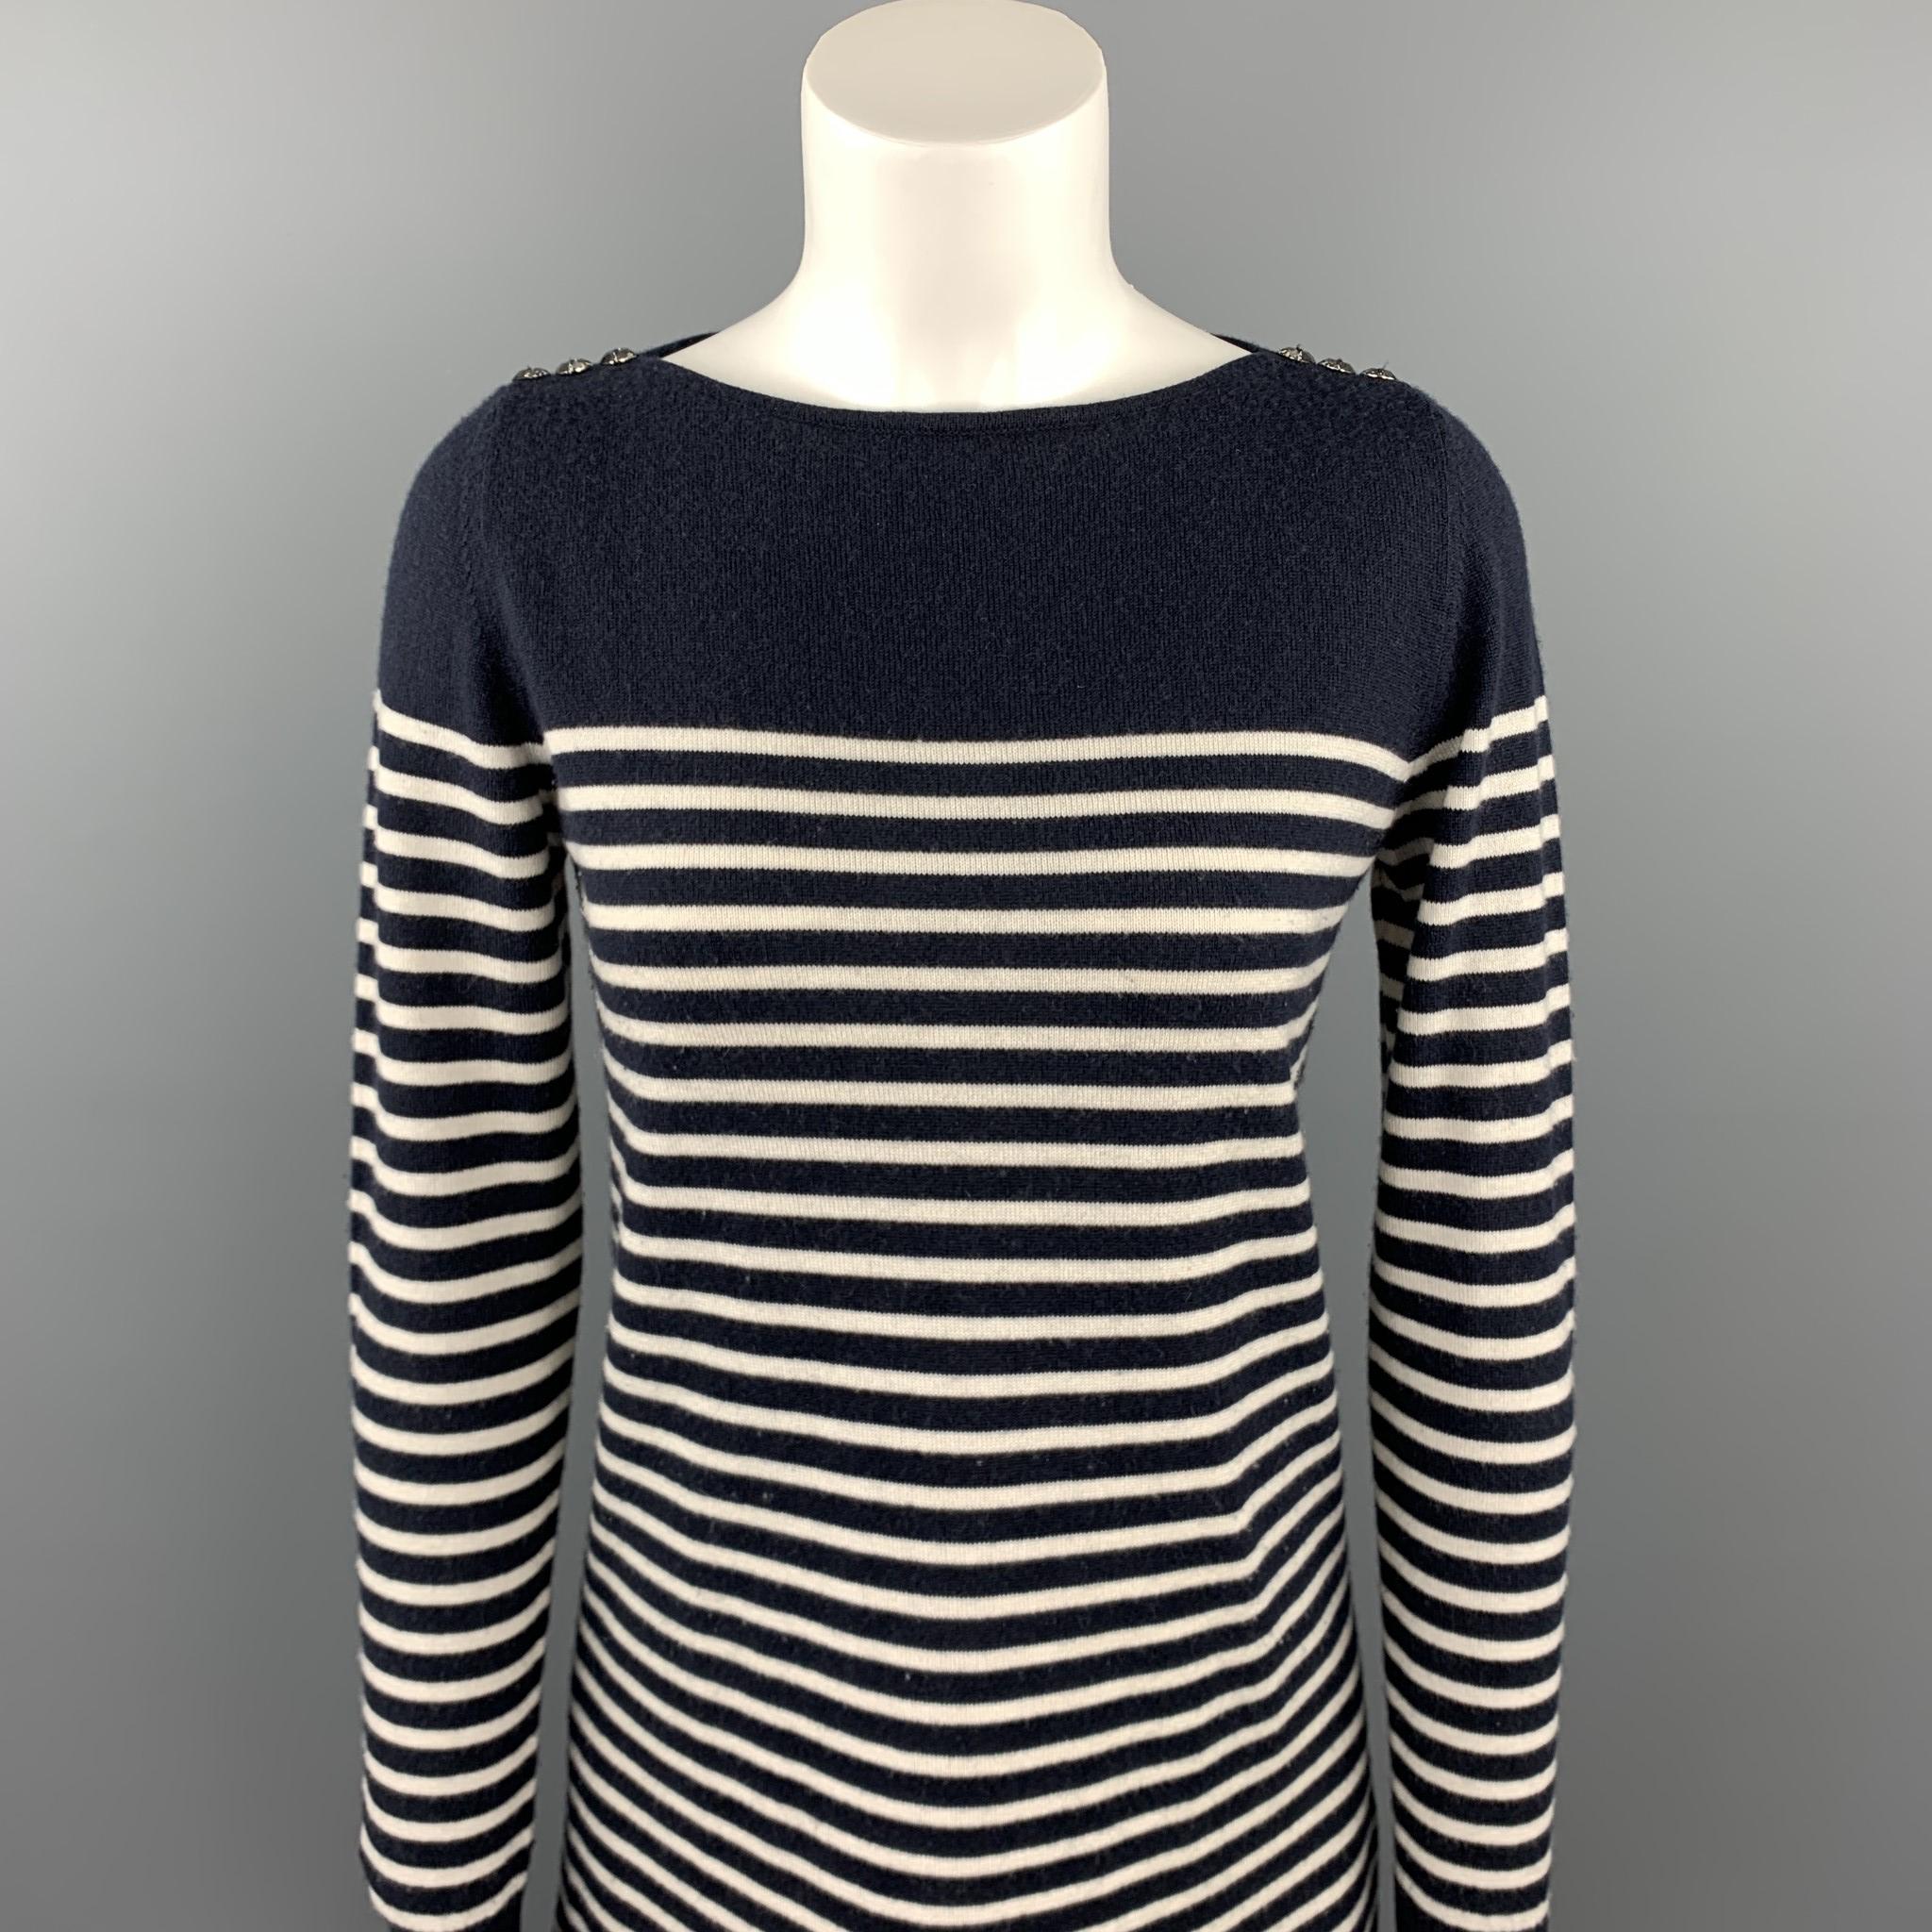 AZZARO sweater dress comes in a navy & white stripe cashmere / silk featuring mirrored button details, ribbed hem, and a loose neck. Made in Italy.

Very Good Pre-Owned Condition.
Marked: FR 40

Measurements:

Shoulder: 14 in.
Bust: 34 in. 
Sleeve: